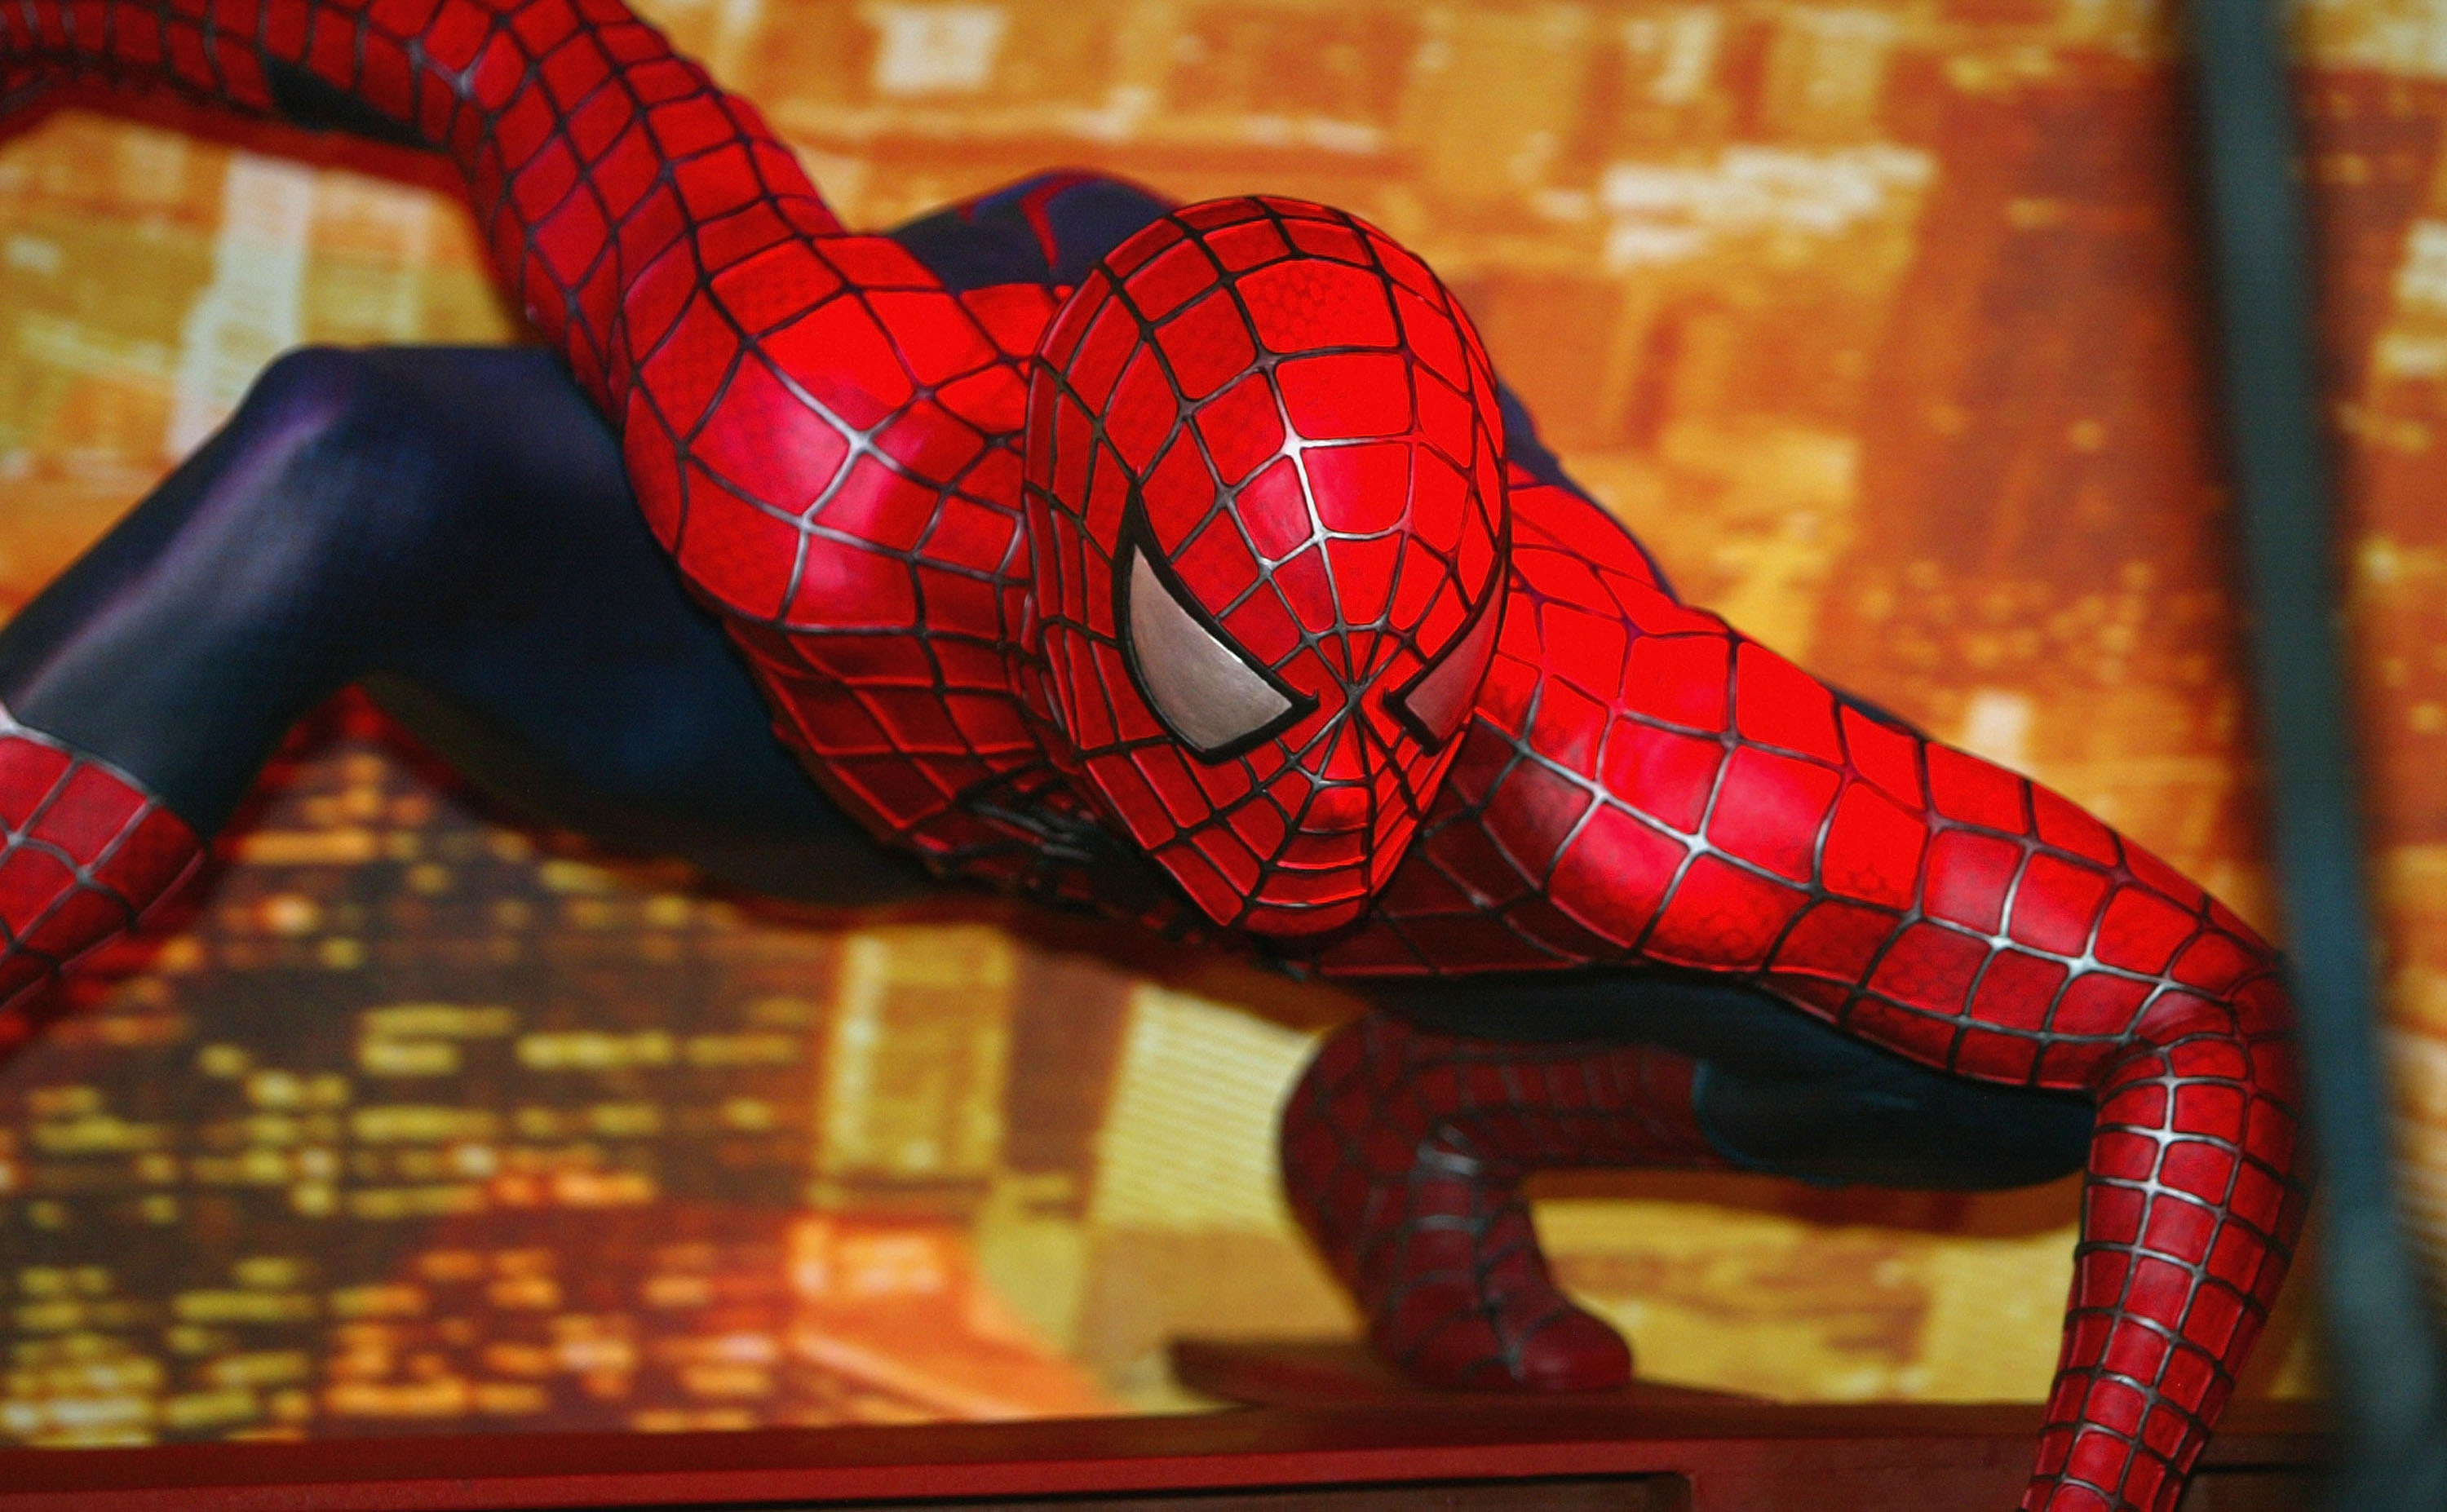 A wax figure of Spider-Man with one arm raised